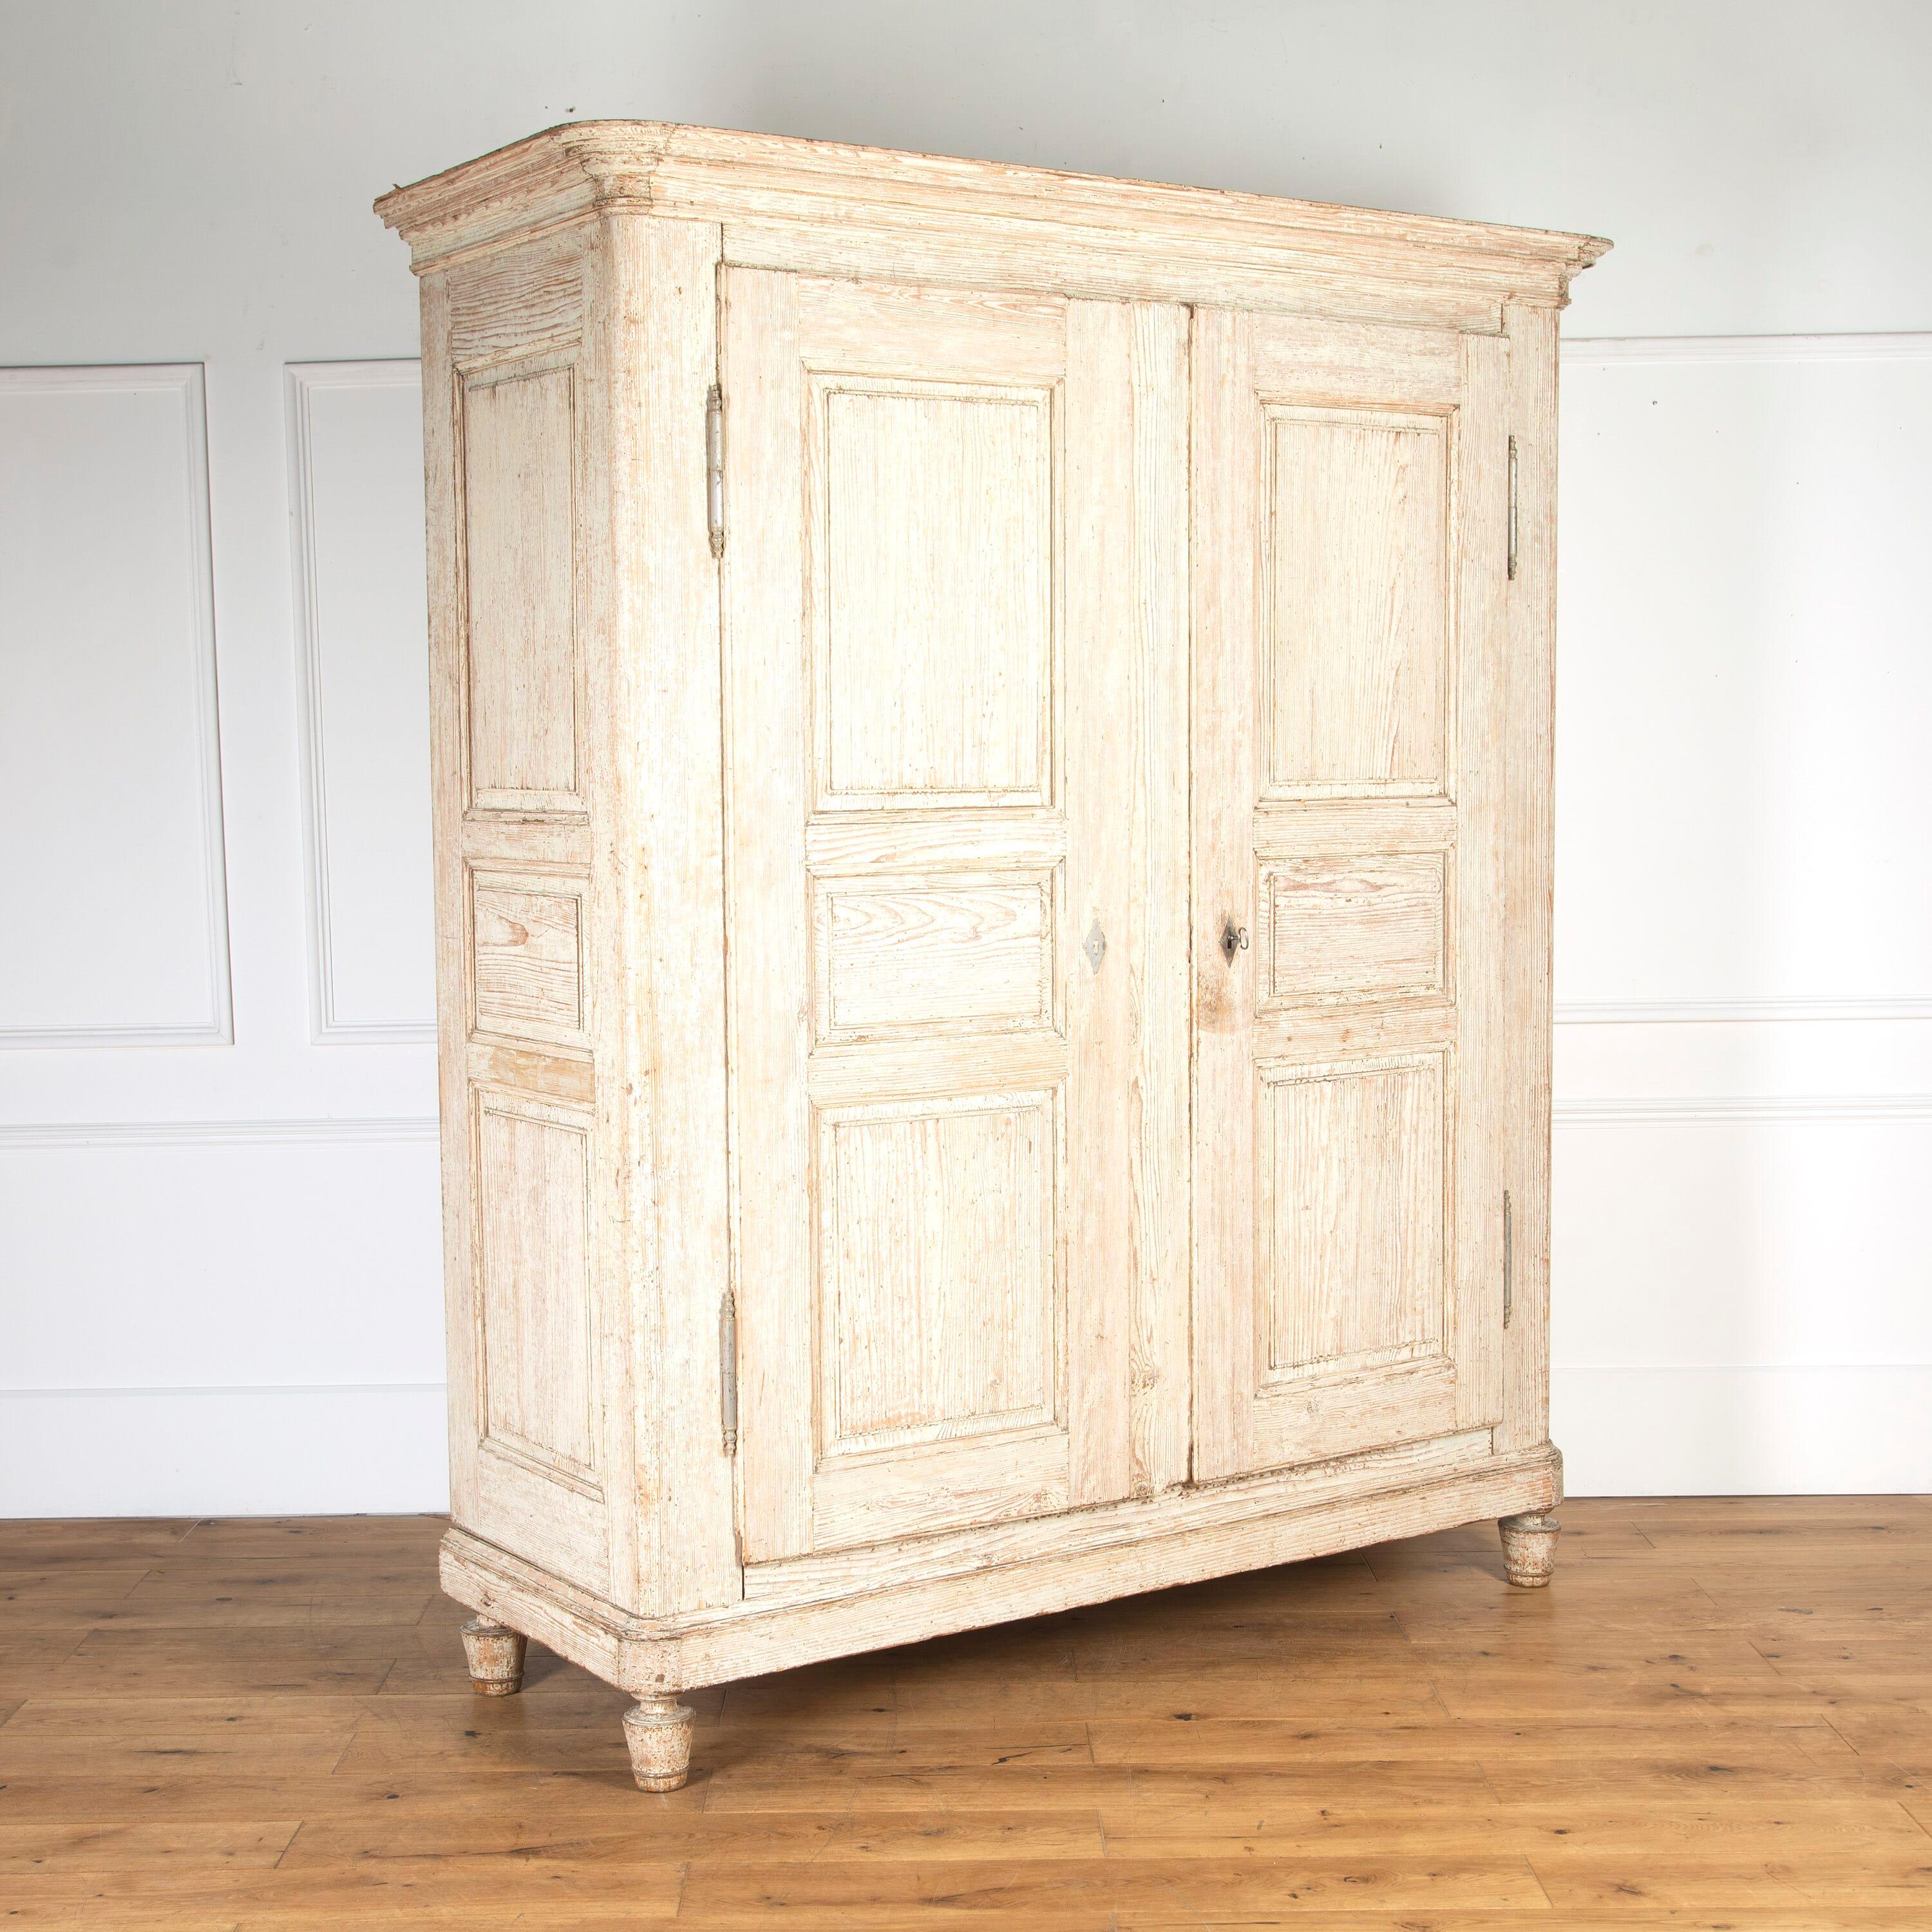 Stunning 18th Century French armoire. 

This armoire comes from the Alsace region of France.

It has been dry-scraped back to its original painted finish which is an attractive white.

Features a decorative carved cornice above two panelled